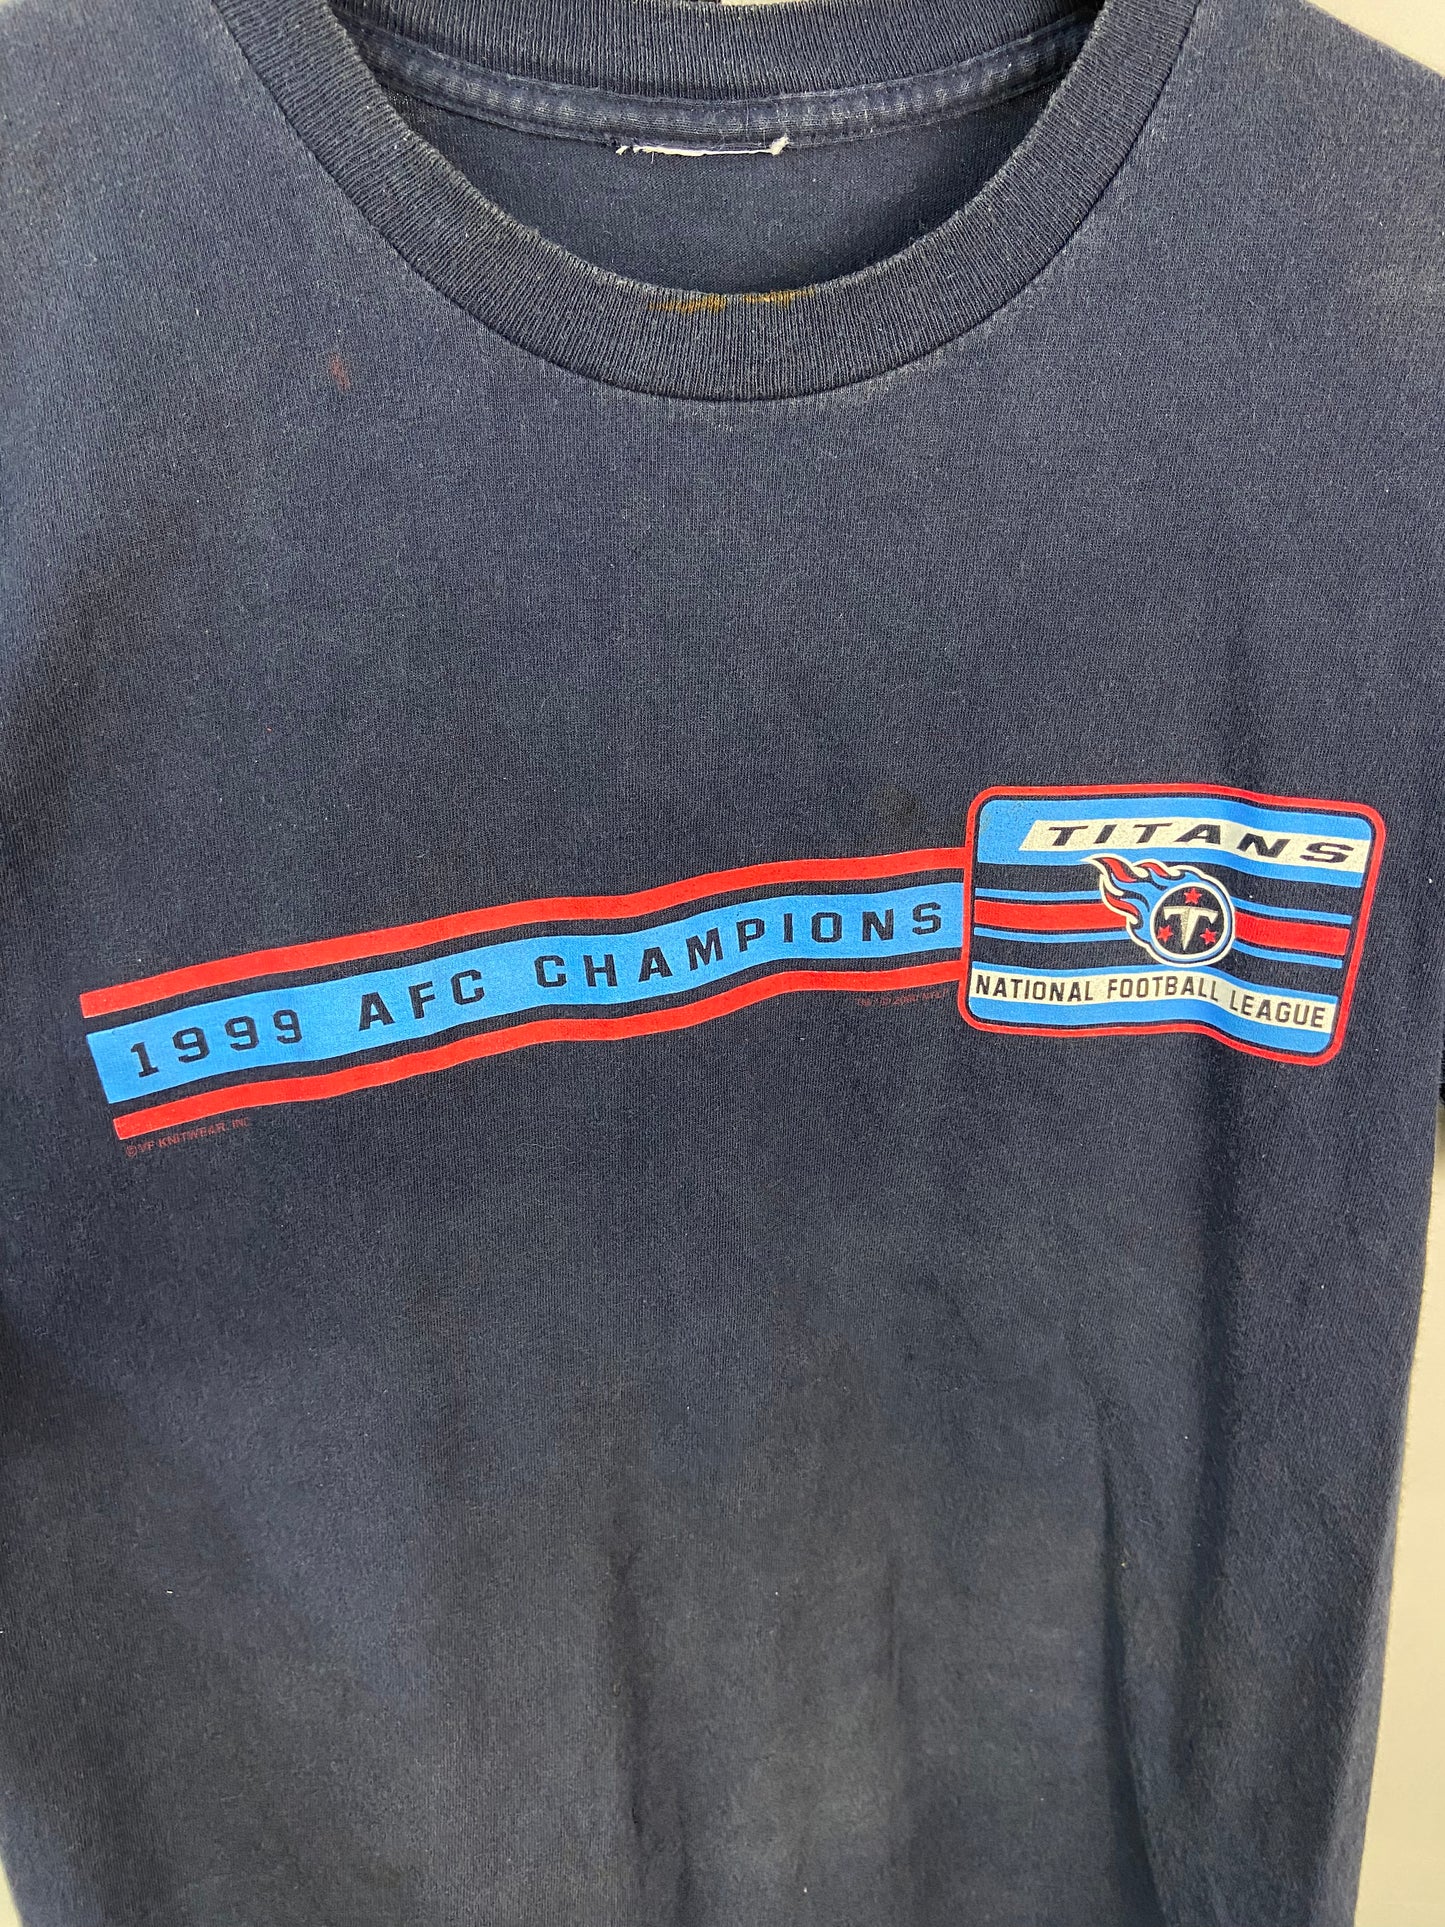 Load image into Gallery viewer, VTG Tennessee Titans 1999 AFC Champions Tee Sz S
